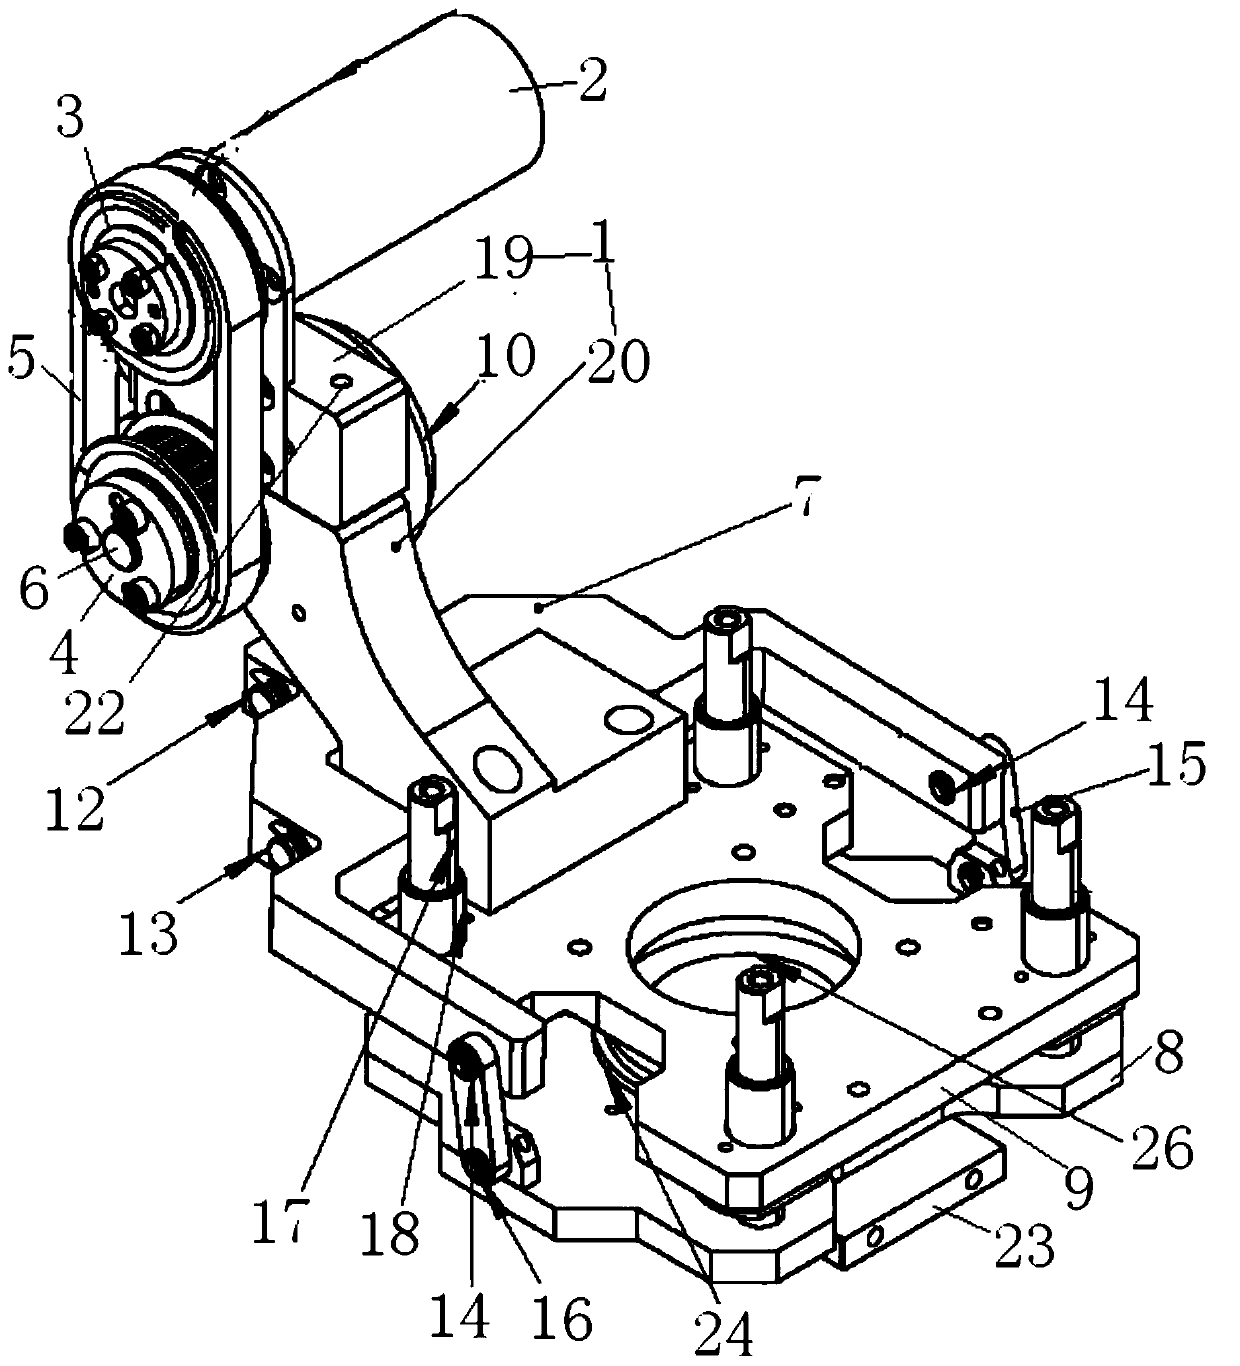 Electric material beating device